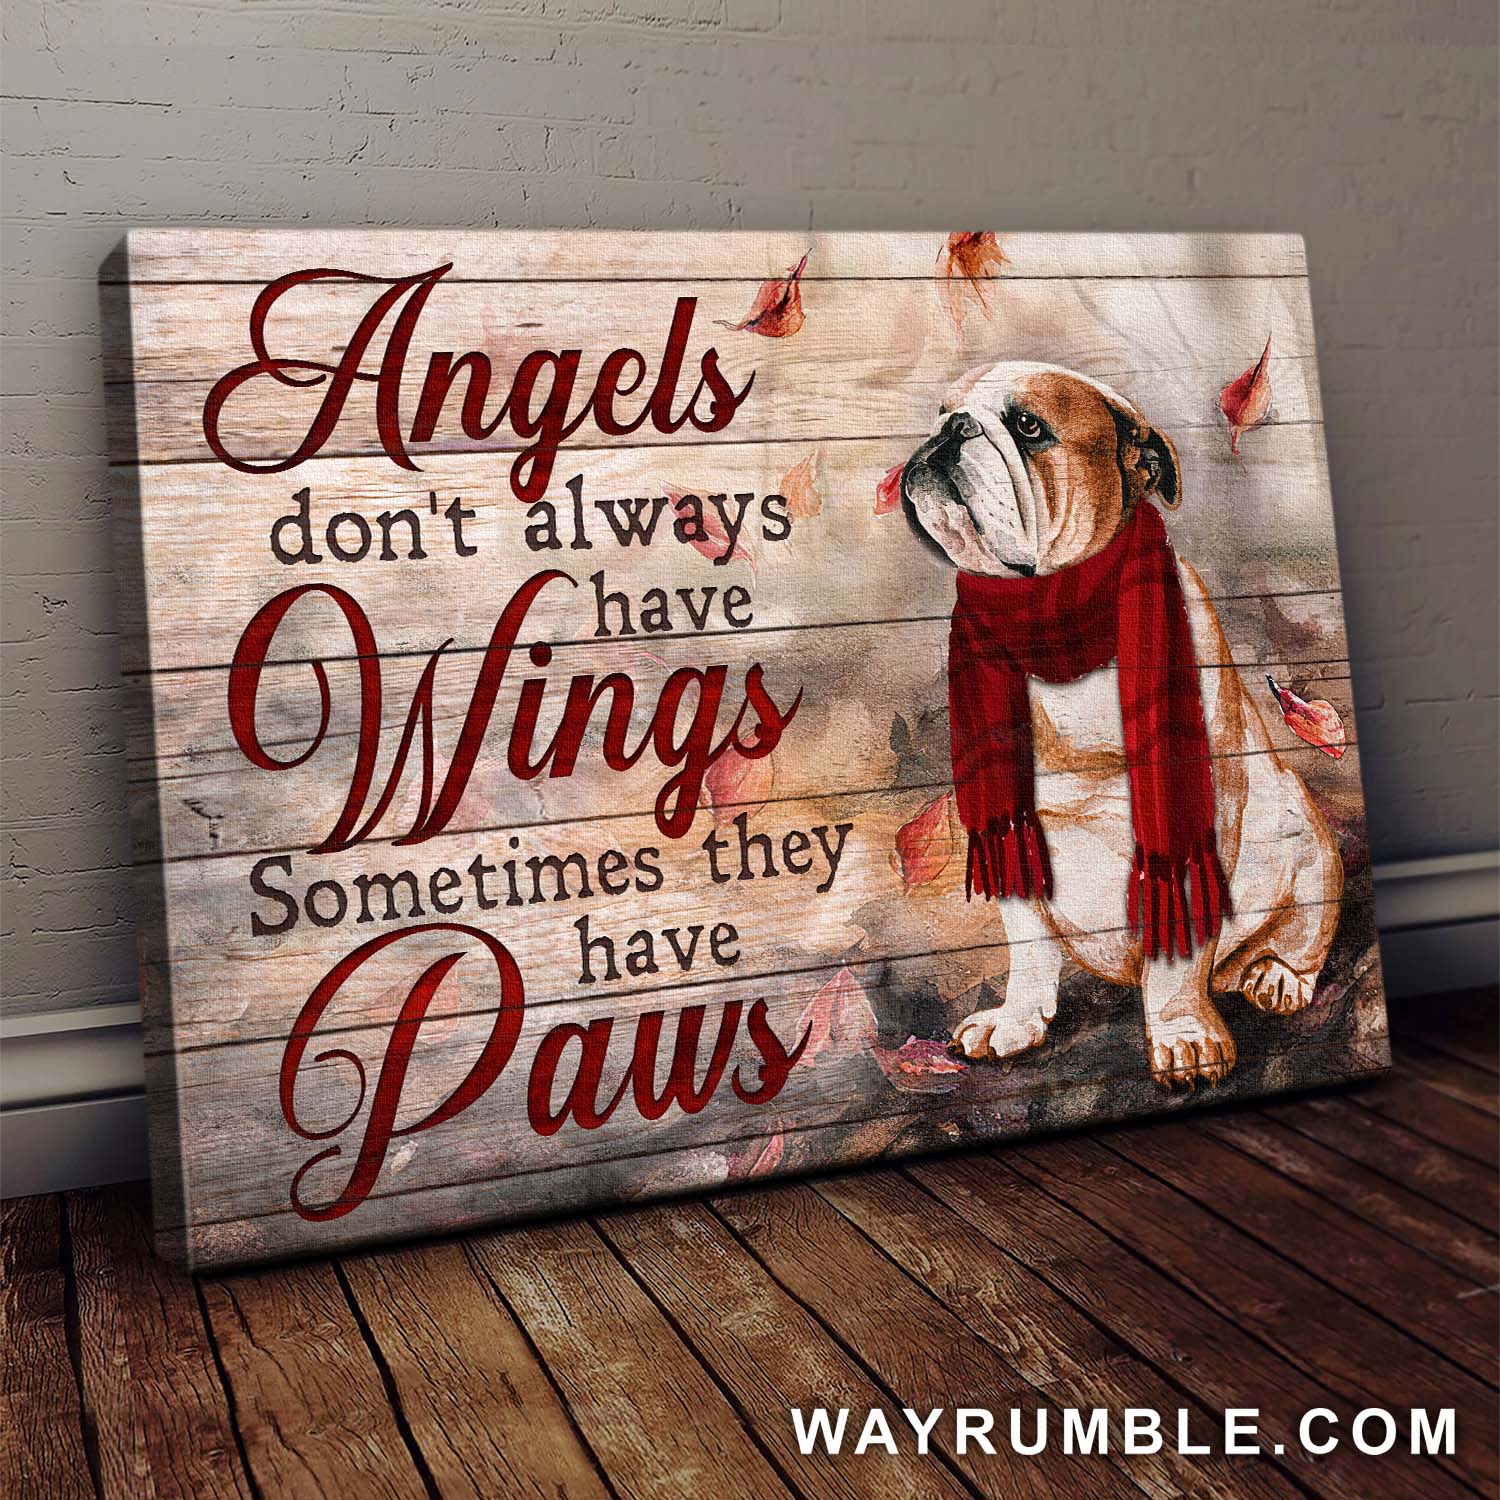 English bulldog, Autumn Leaf, Angels don't always have wings sometimes they have paws - Dog Landscape Canvas Prints, Wall Art